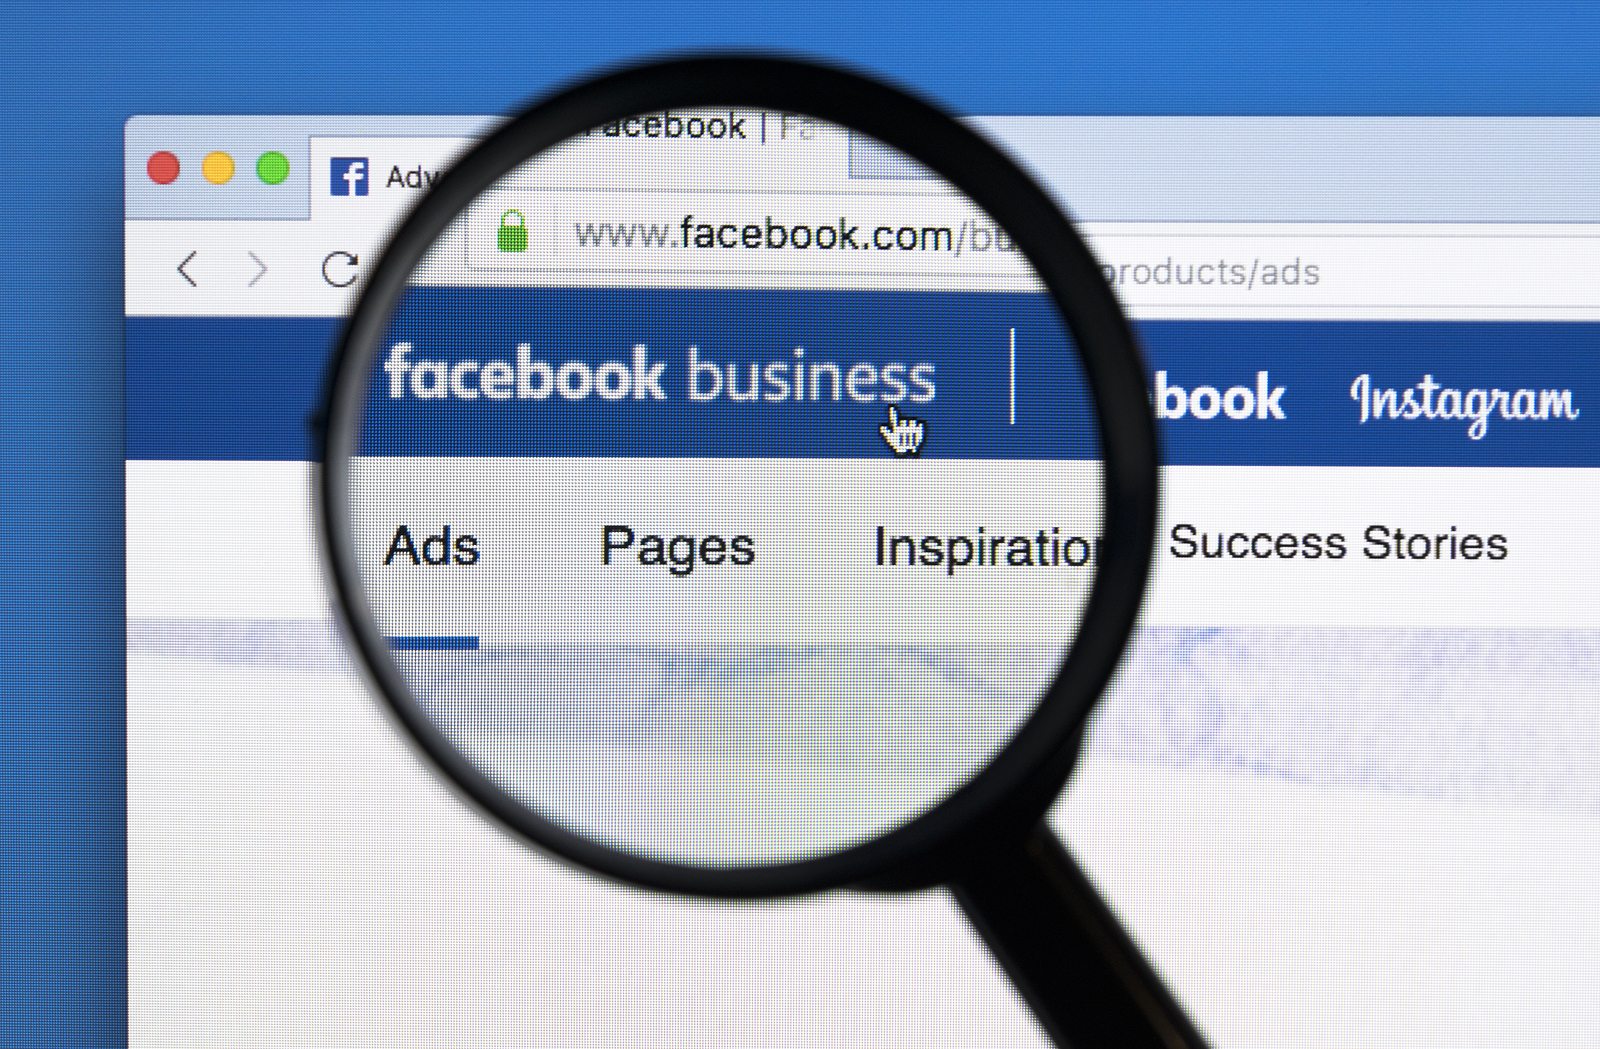 Should My Business Have Facebook Business Page?